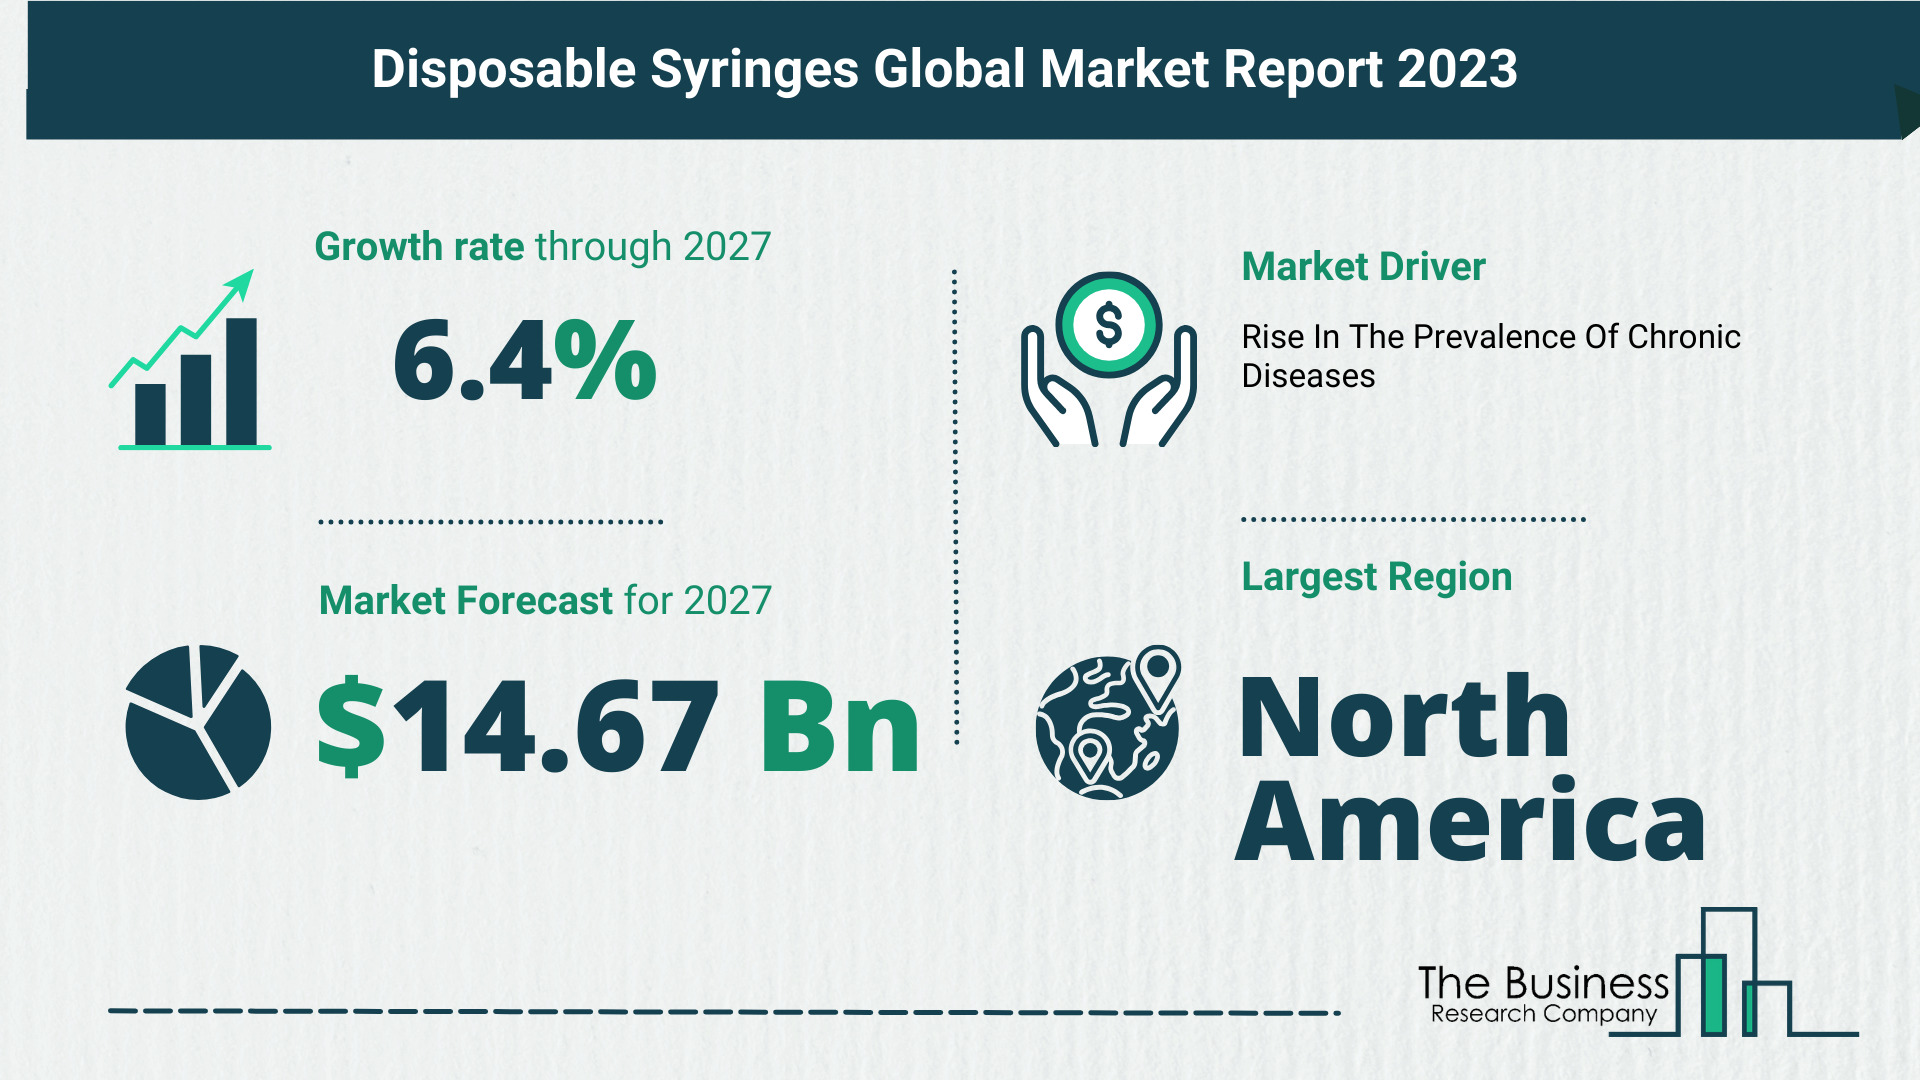 Top 5 Insights From The Disposable Syringes Market Report 2023